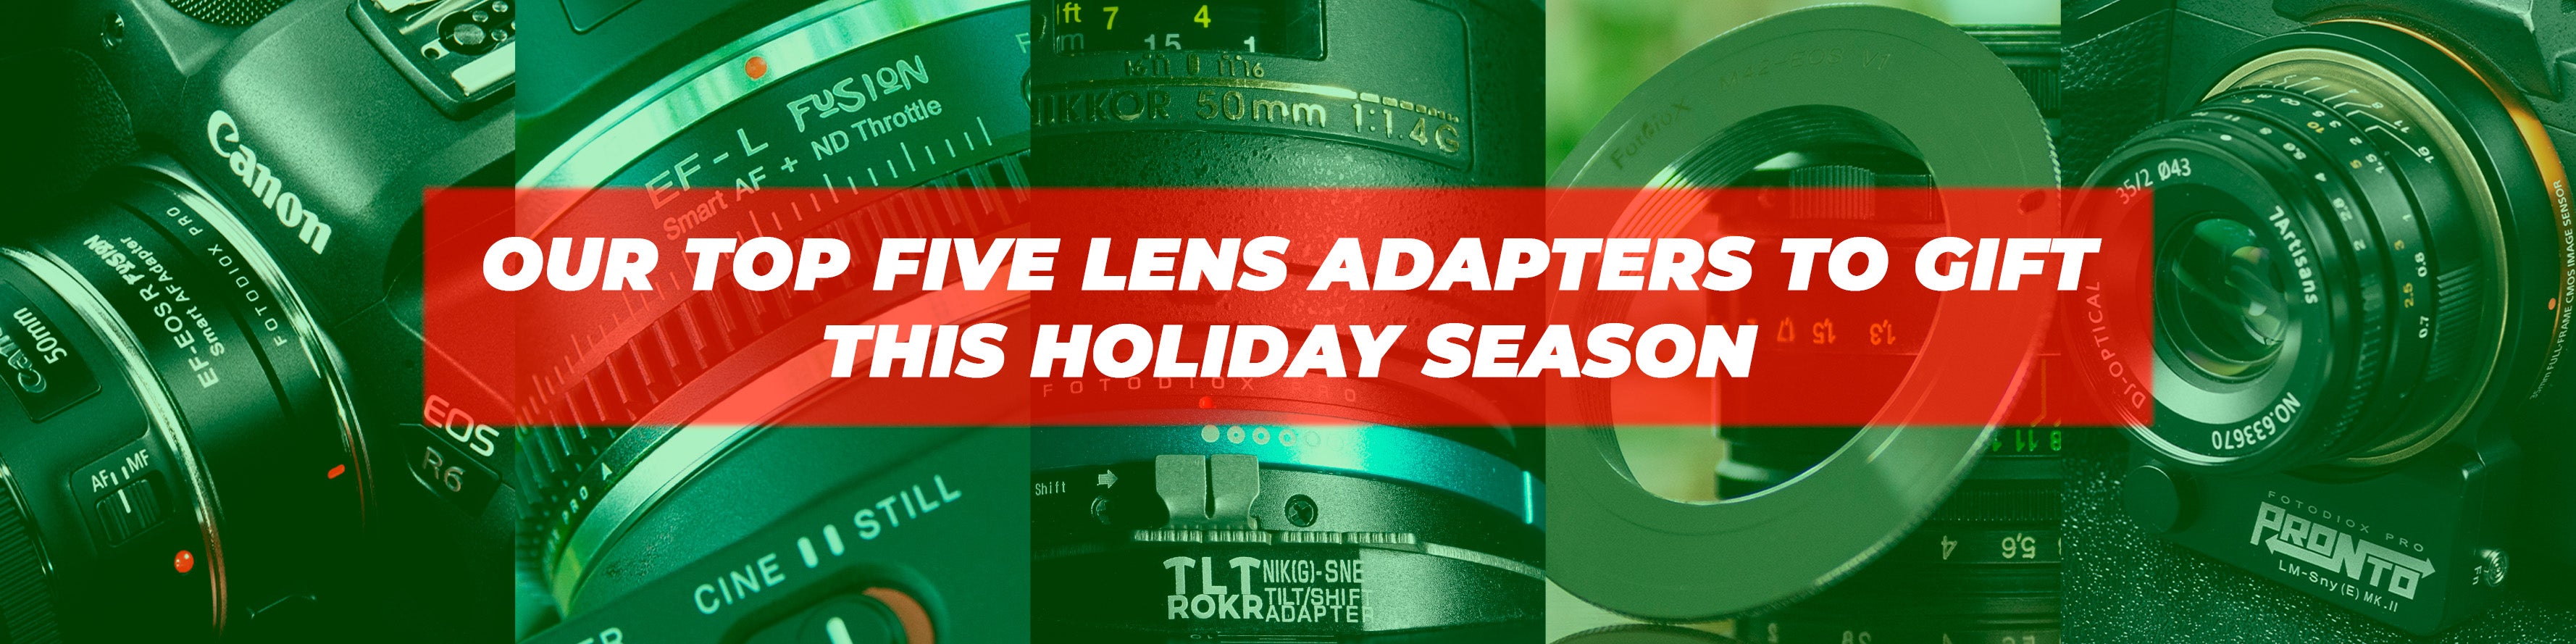 Our Top Five Lens Adapters to Gift This Holiday Season